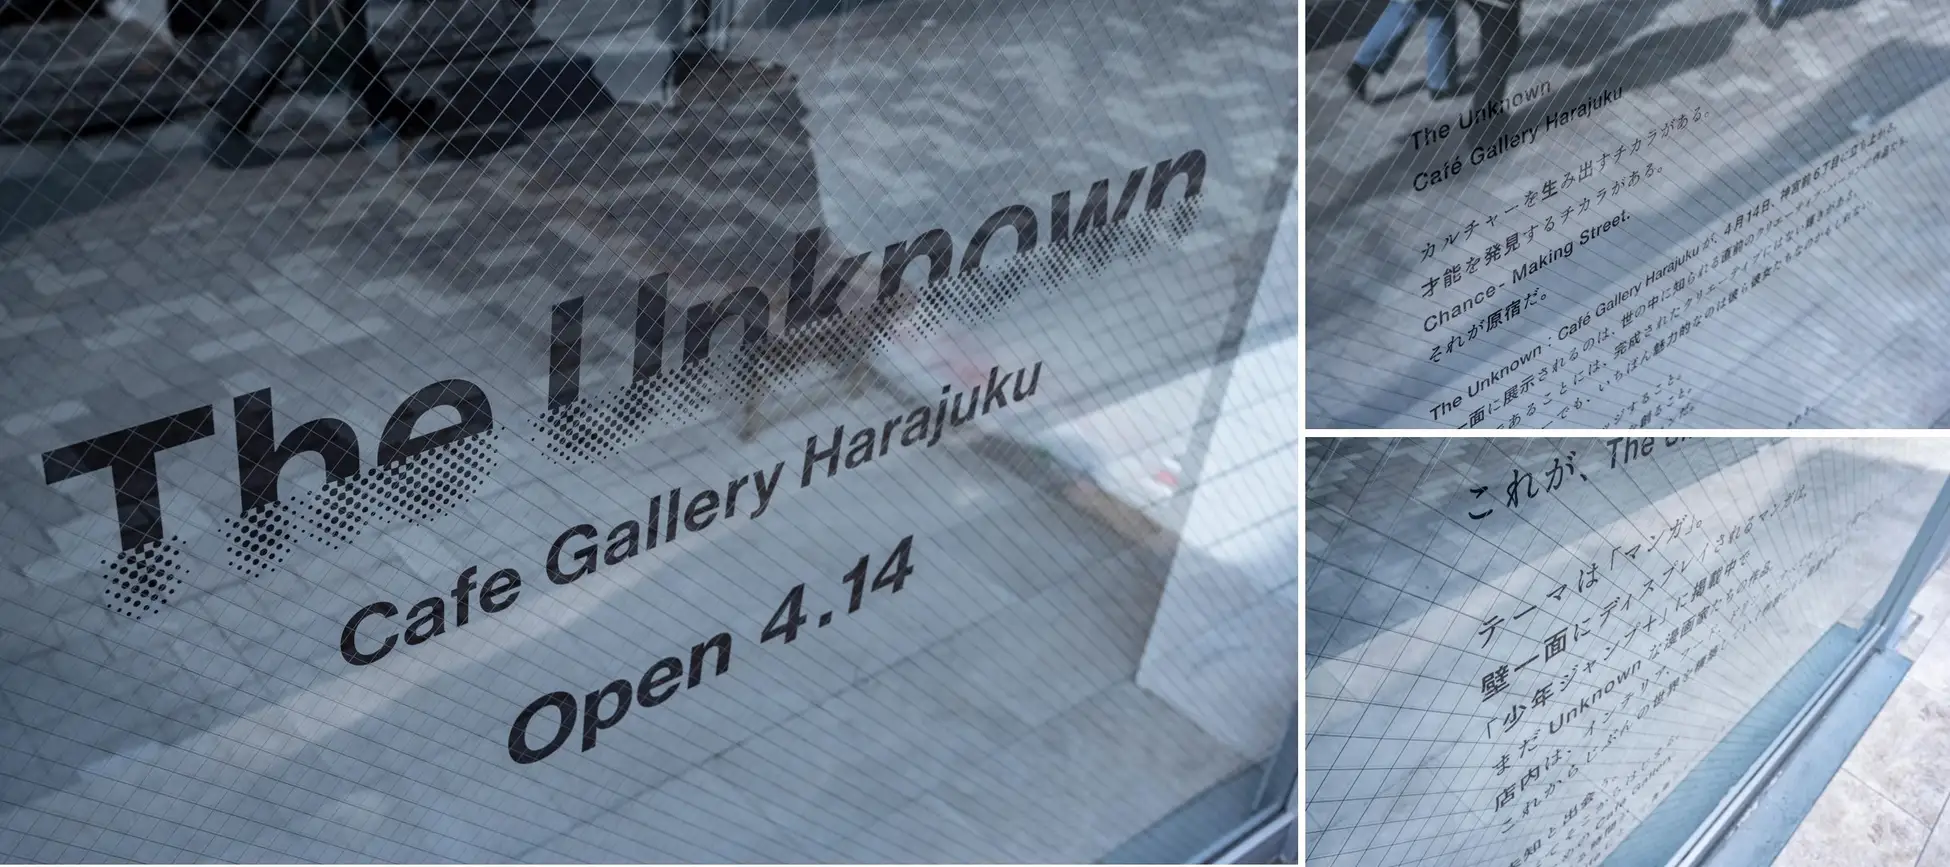 “Unknown”　な才能に触れる場所「The Unknown Café Gallery Harajuku」2023年4月14日(金)オープン決定！